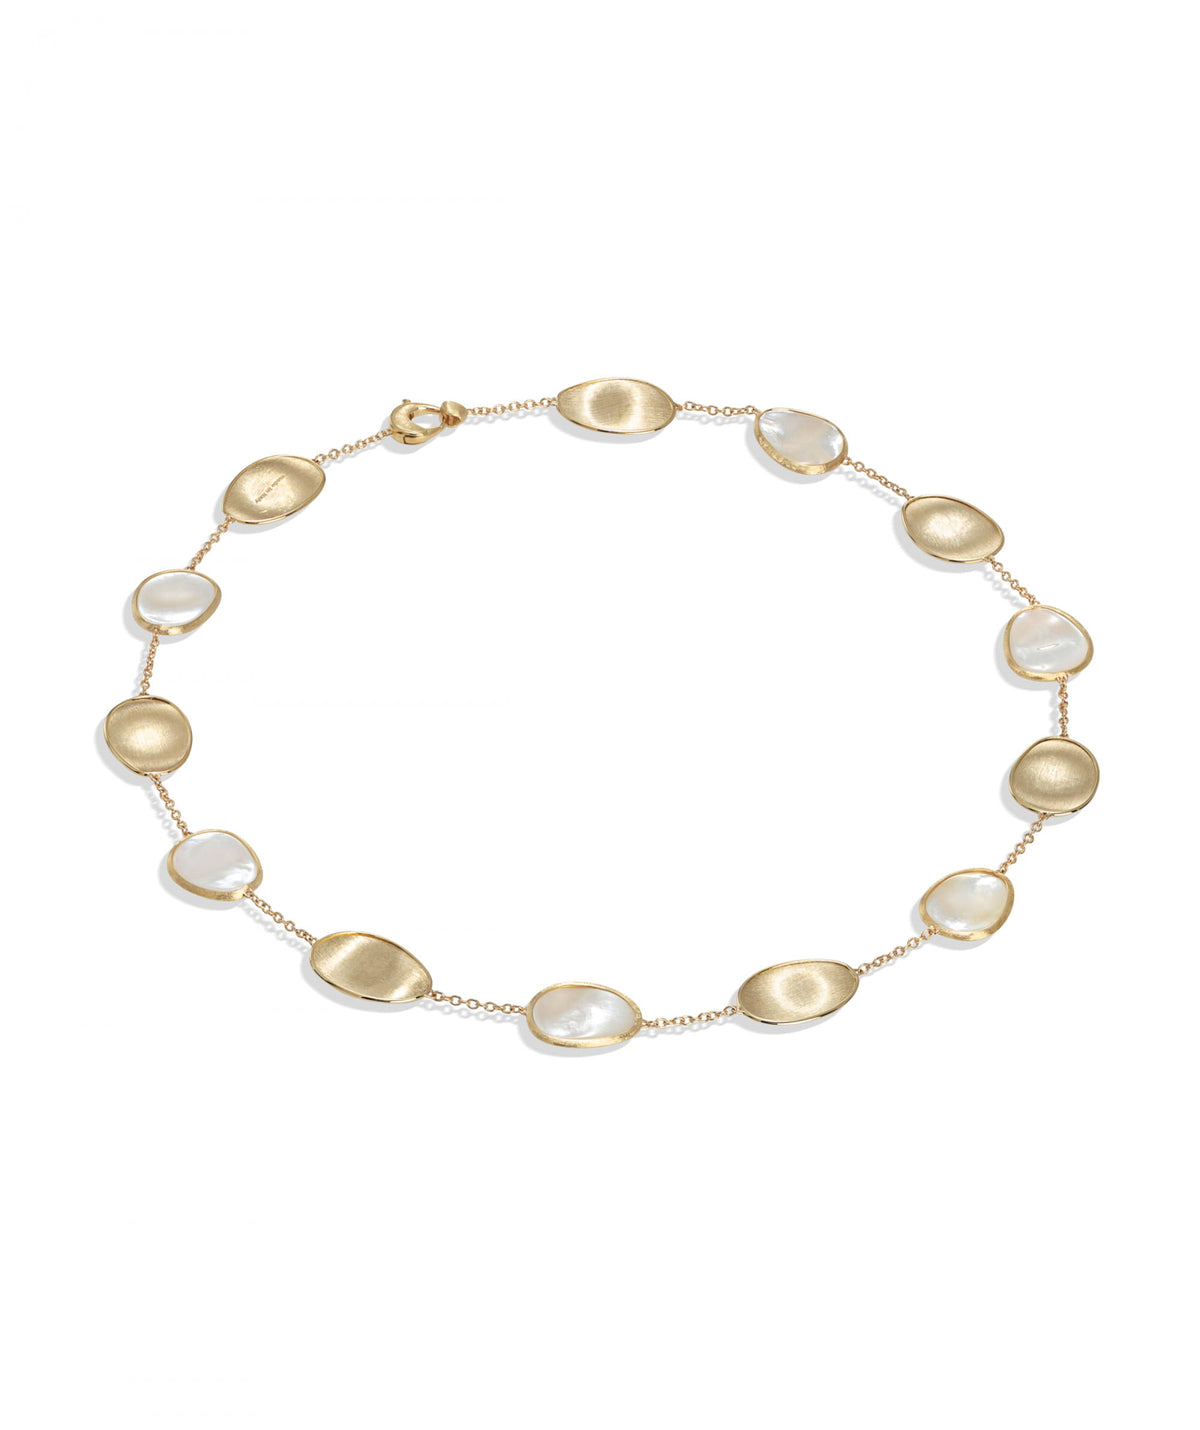 Lunaria Necklace in 18k Yellow Gold with White Mother of Pearl - Orsini Jewellers NZ